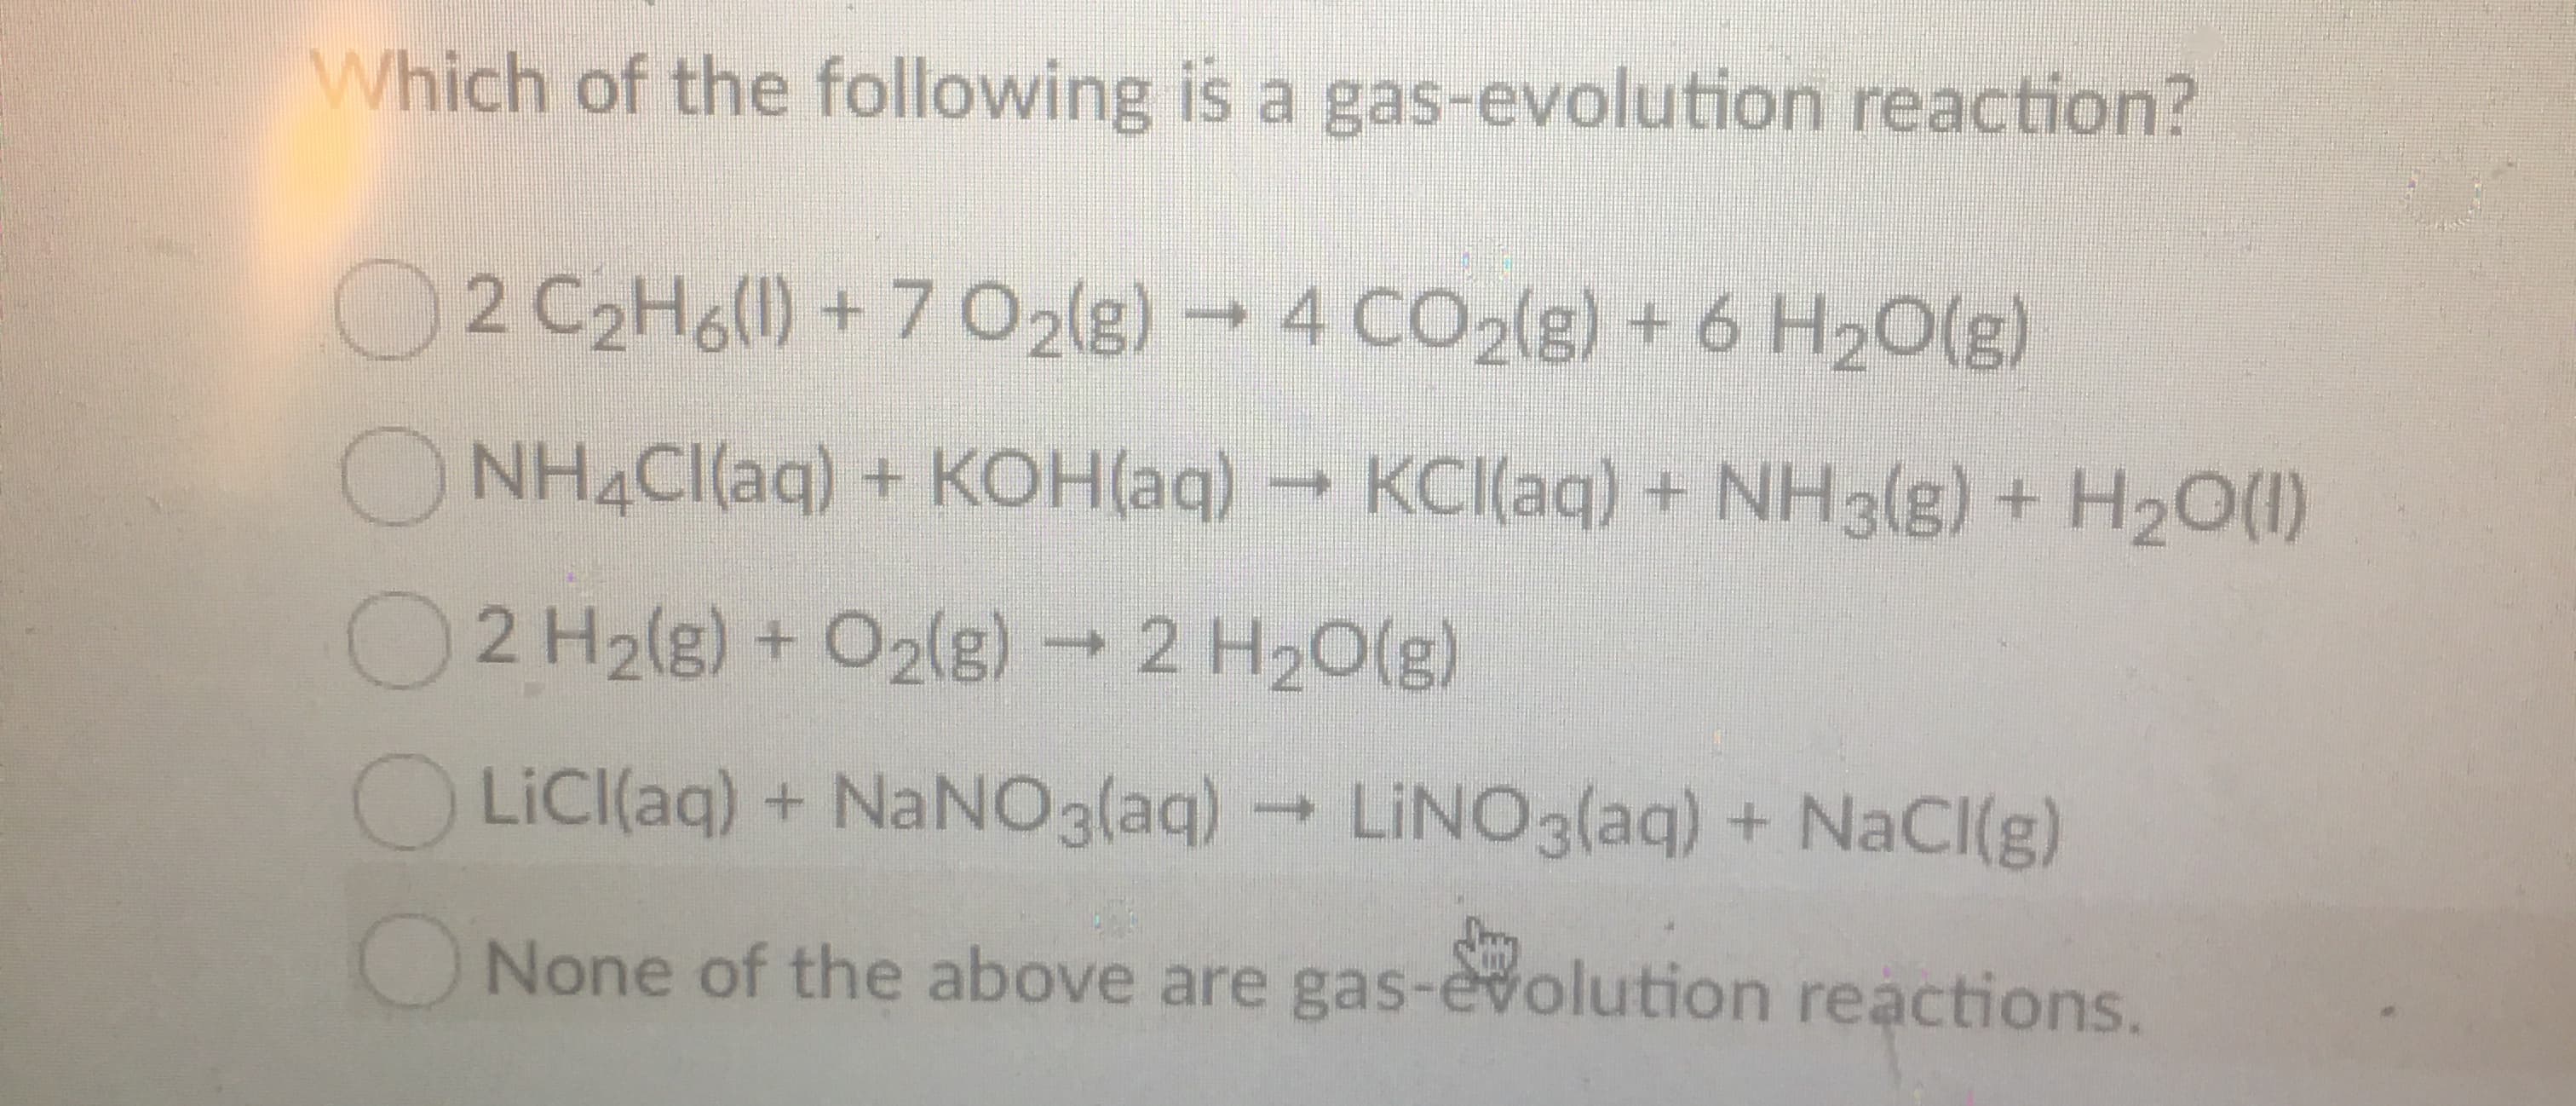 Which of the following is a gas-evolution reaction?
2 C2H6()+7 02(g)4 CO2(g) + 6 H20(g)
NH4CI(aq) + KOH(aq) KCI(aq) + NH3(g) + H20()
2 H2(g) + O2(8)2 H20(g)
LiCl(aq) + NaNO3(aq)LINO3(aq) + NaCl(g)
None of the above are gas-evolution reactions.
